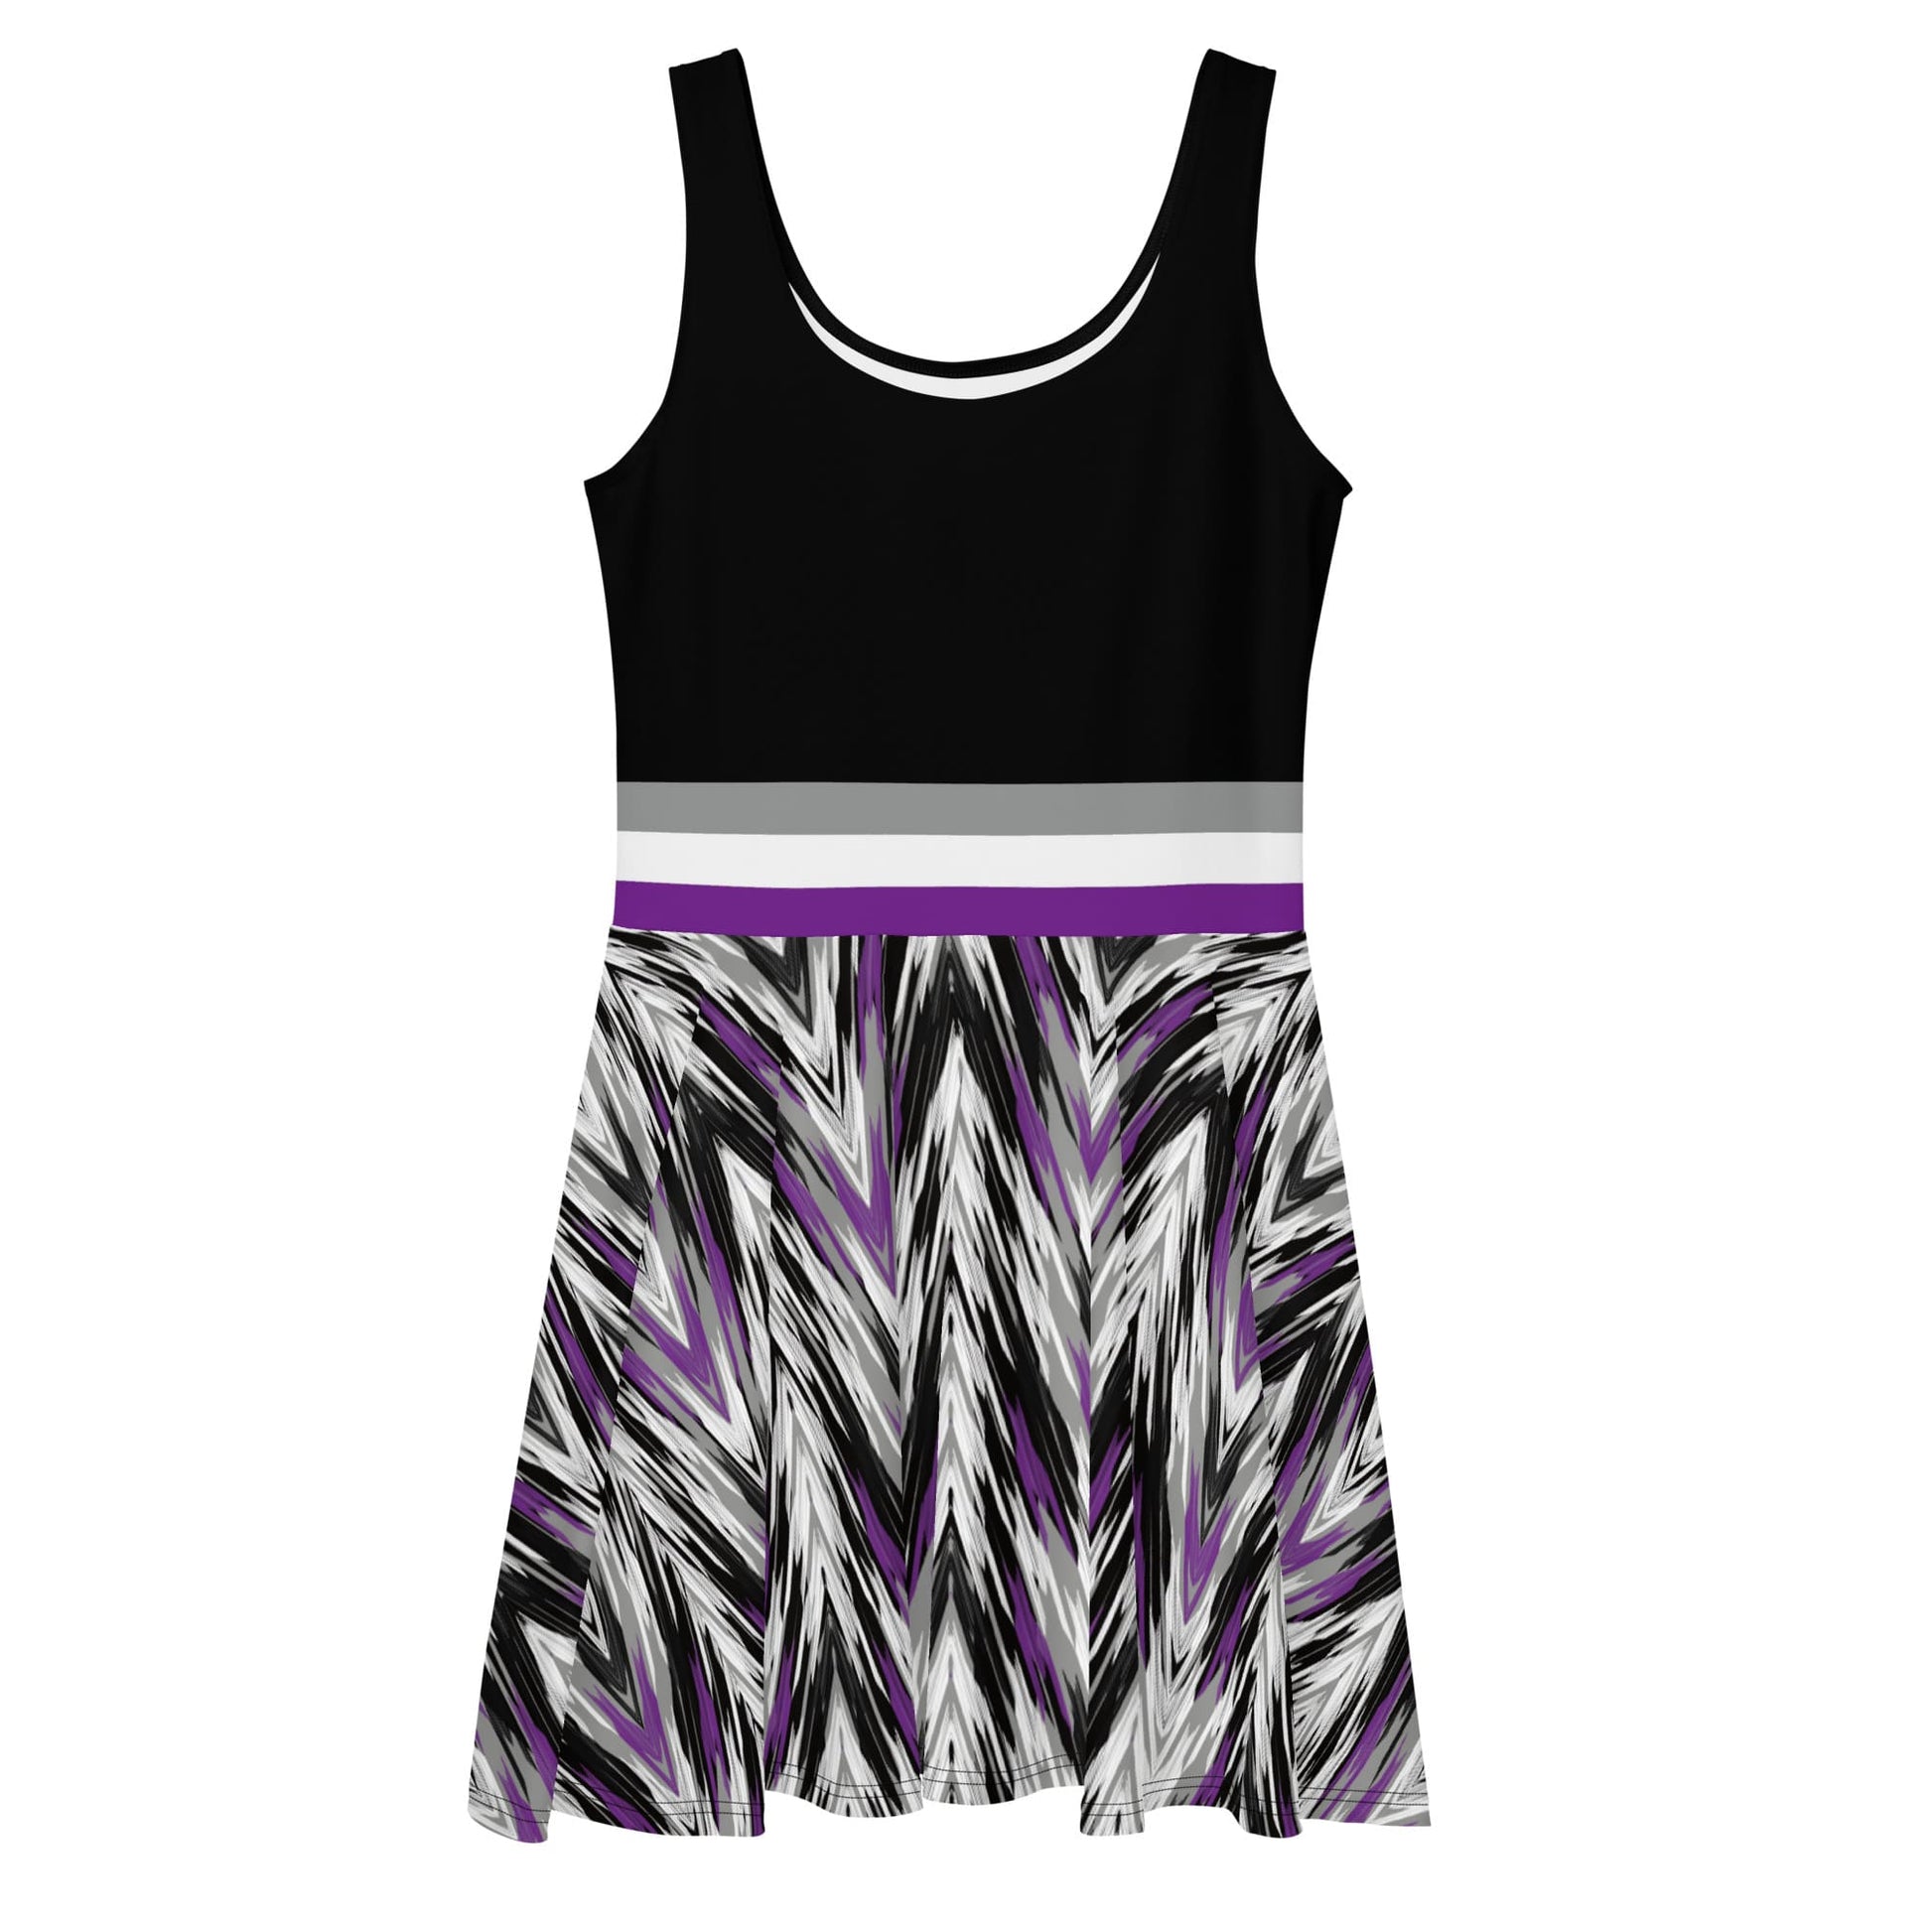 asexual dress, subtle ace pride clothing, flatlay